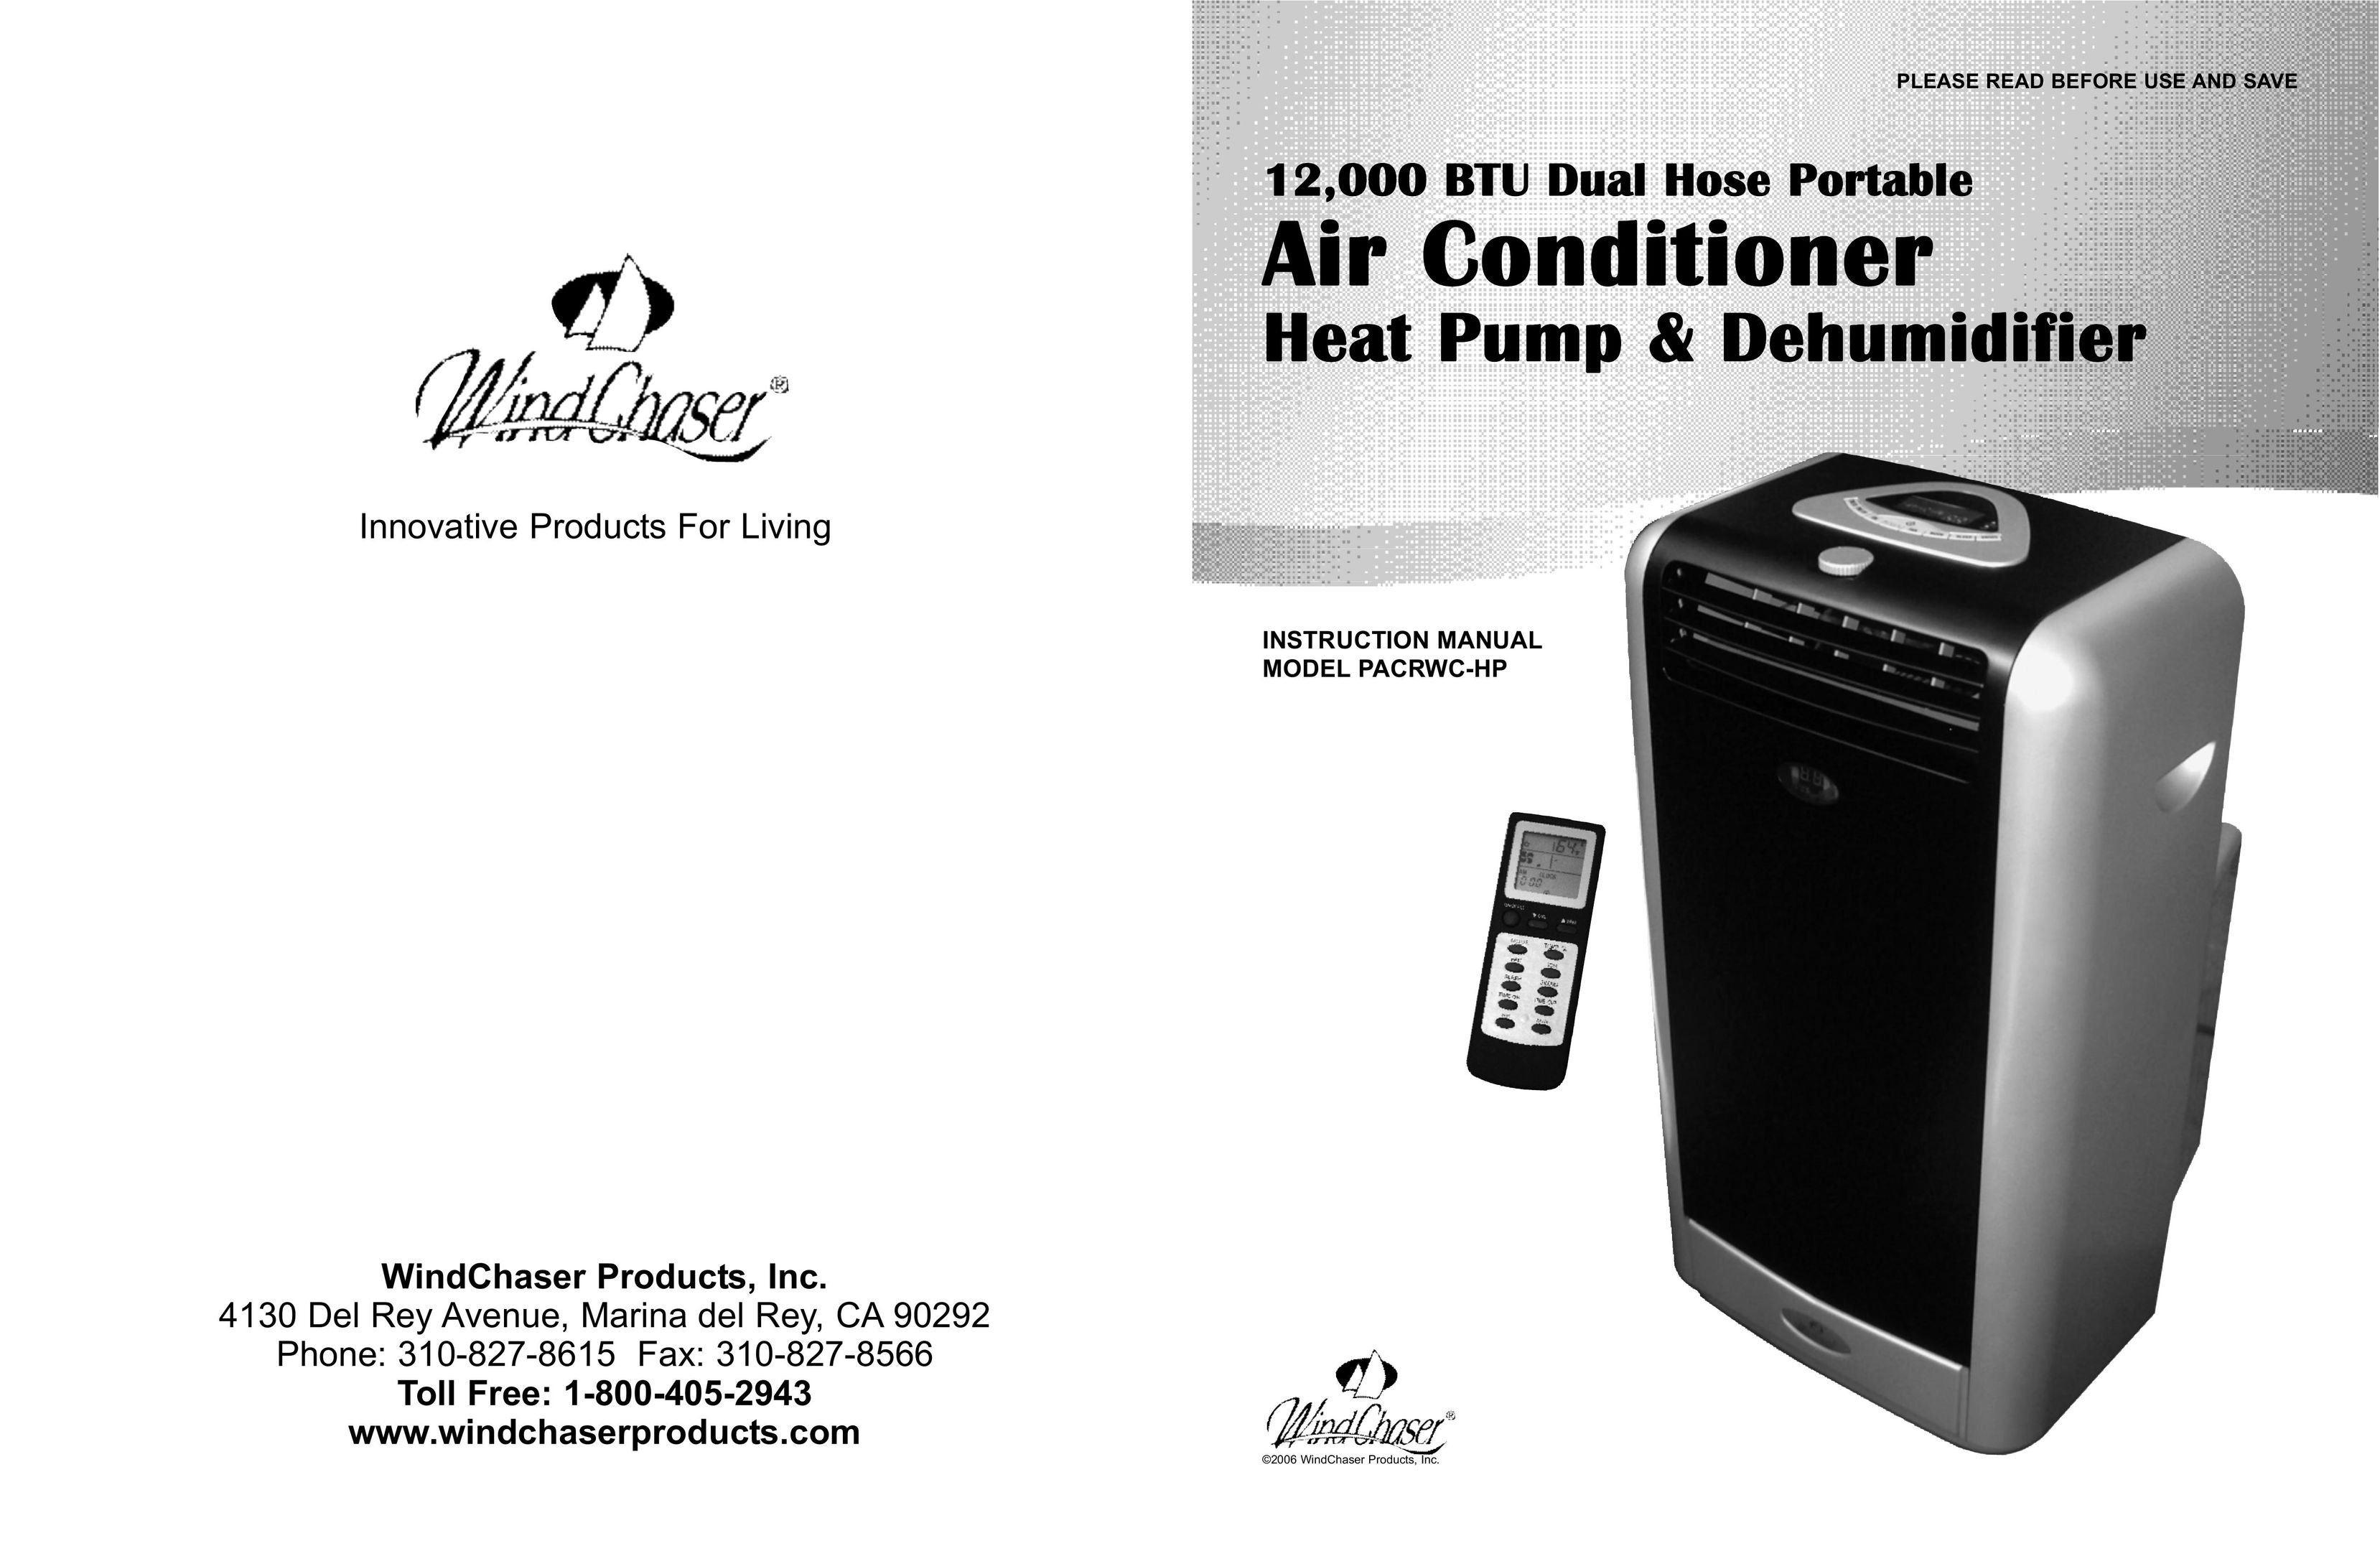 WindChaser Products PACRWC-HP Air Conditioner User Manual